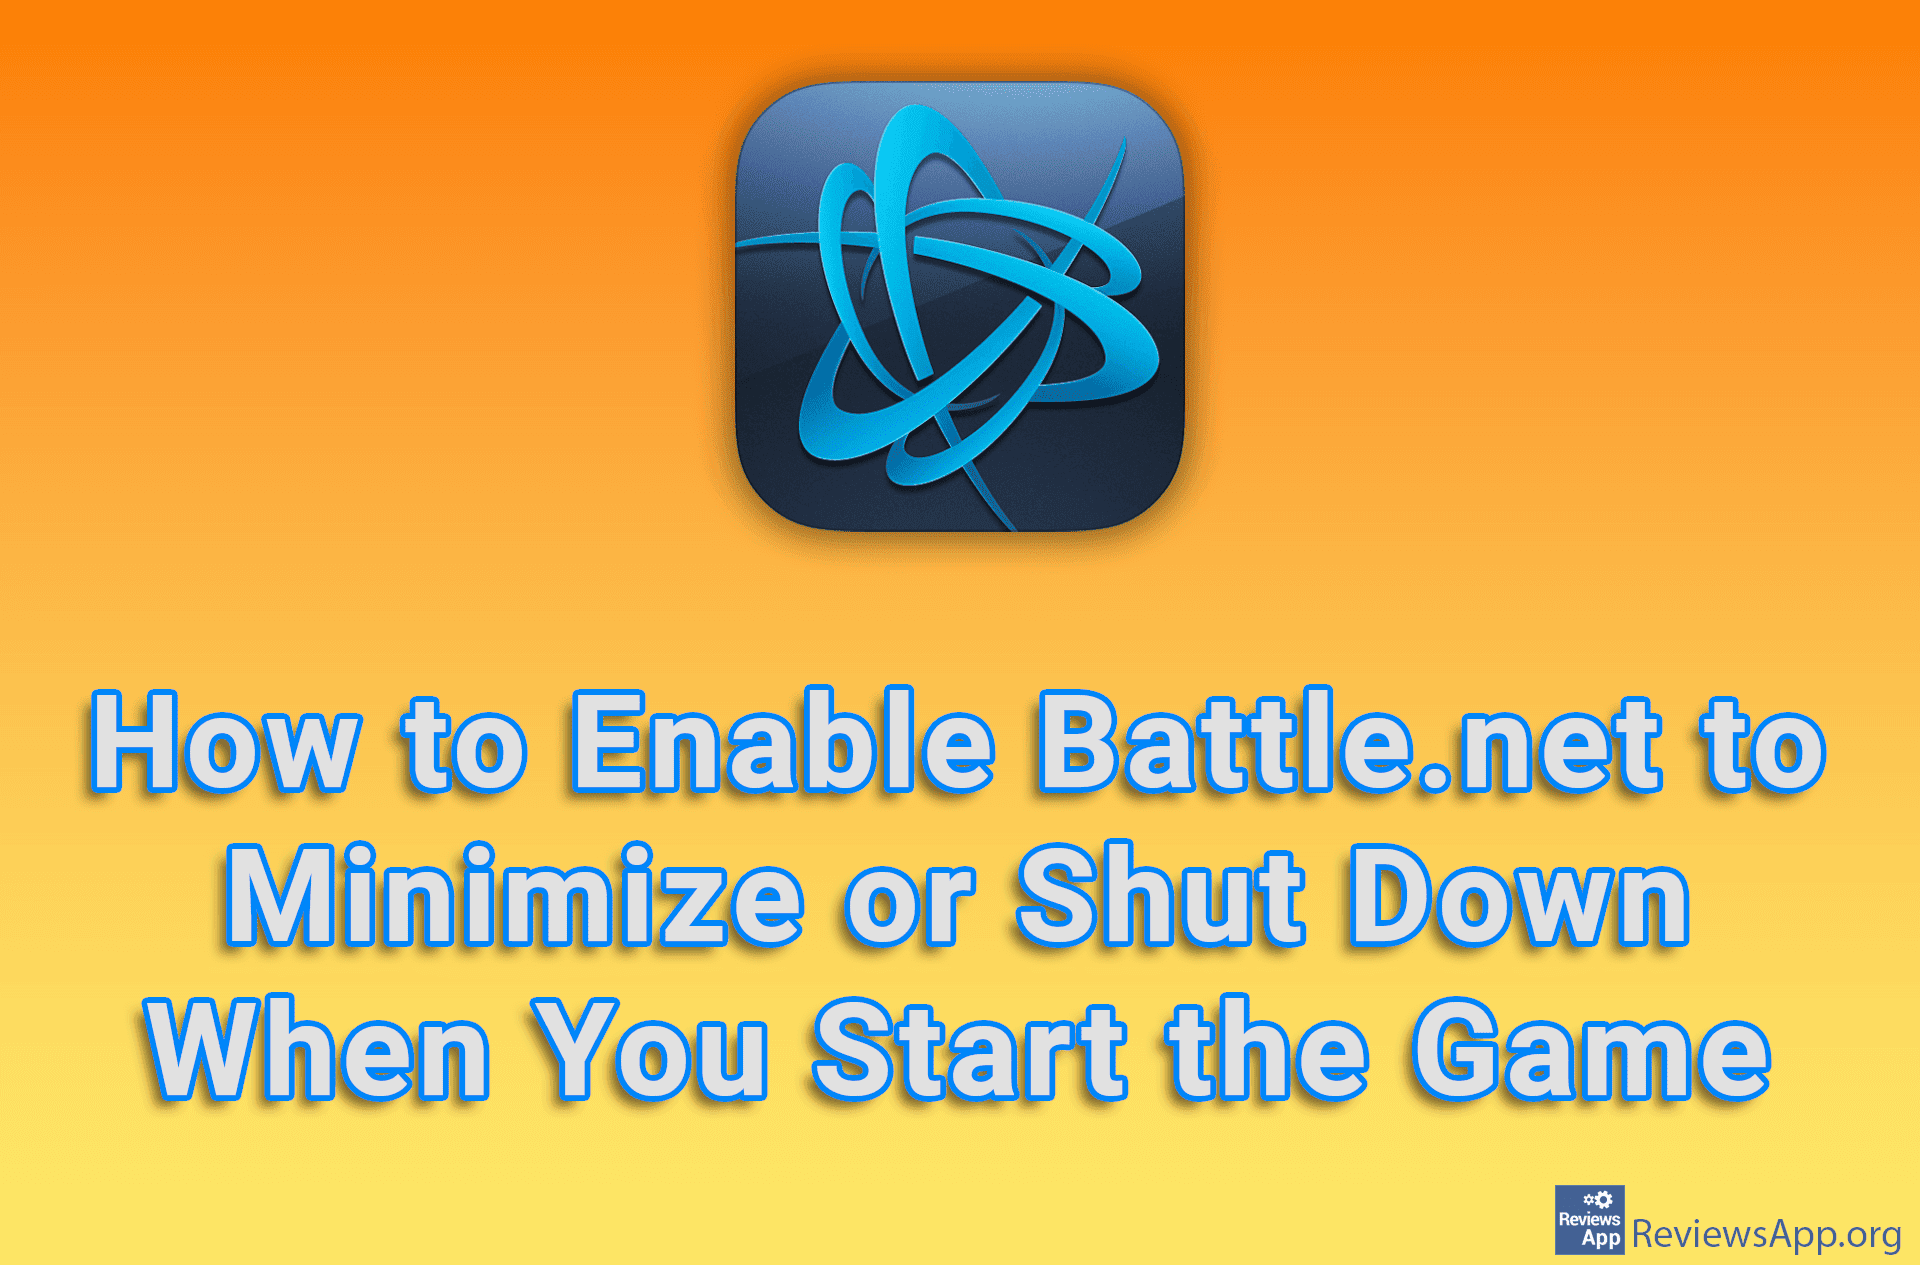 How to Enable Battle.net to Minimize or Shut Down When You Start the Game